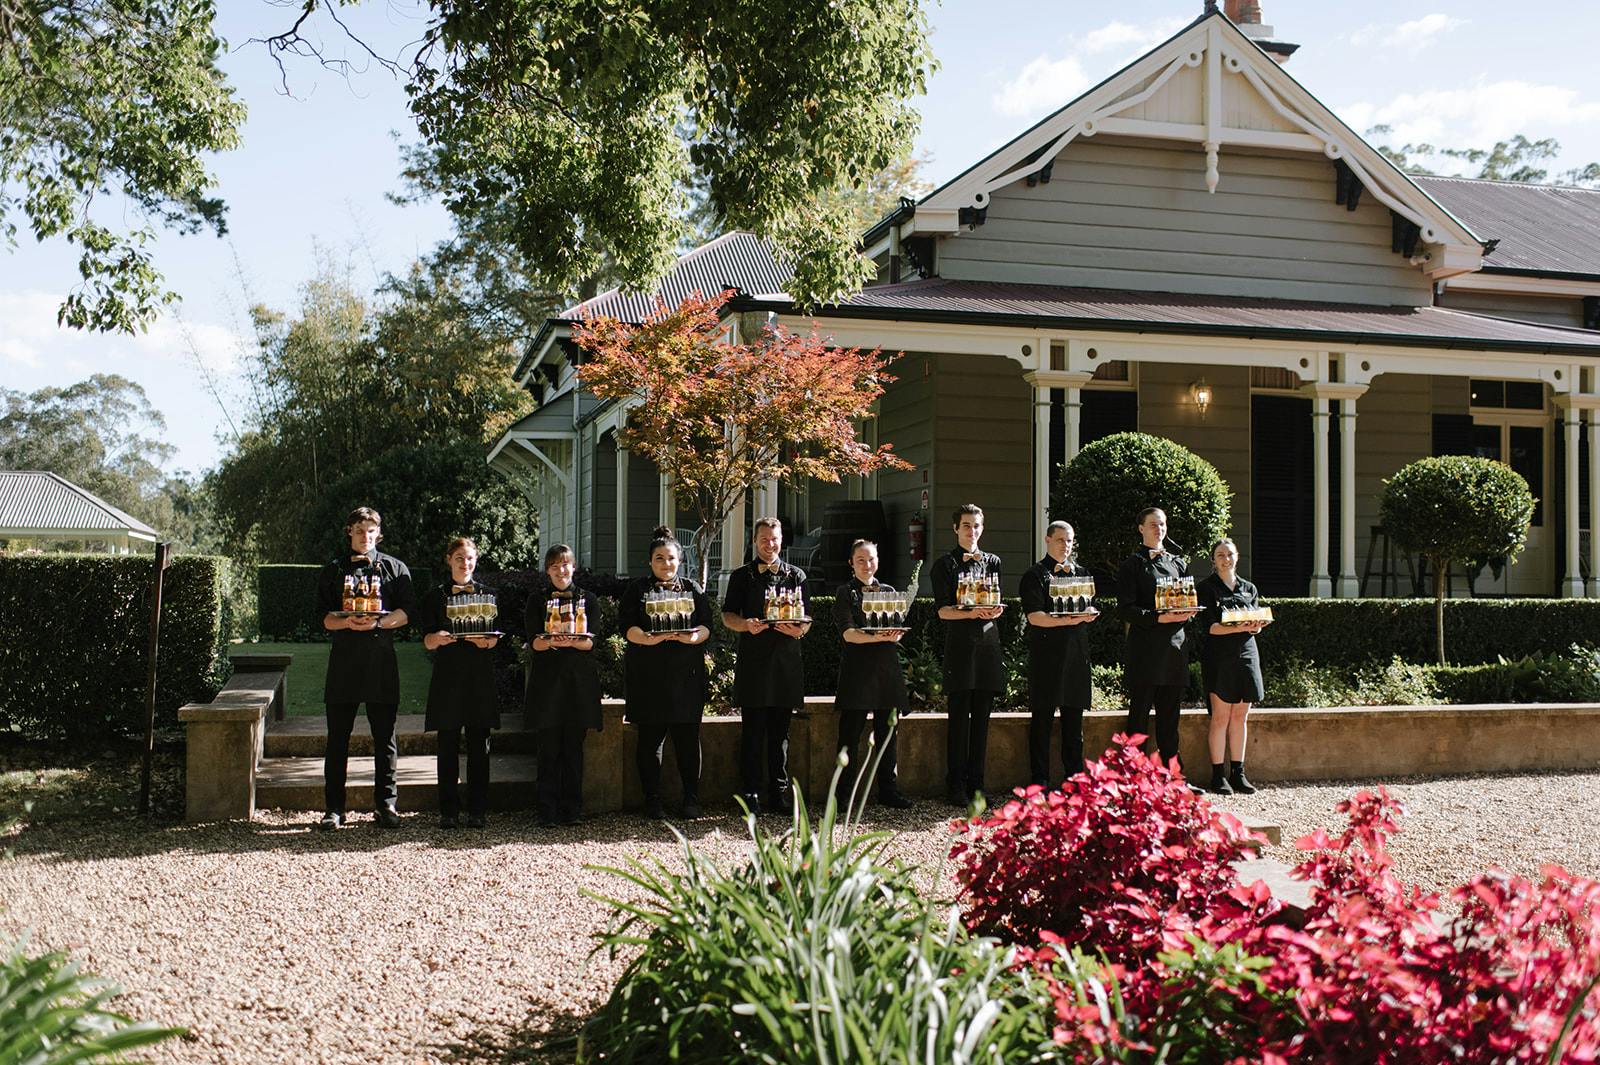 A group of people in matching black attire stands in a row outdoors, each holding a glass of champagne. They are in front of a charming, grey wooden house with white trim, surrounded by well-maintained garden plants and trees. The scene is sunny with a clear blue sky.